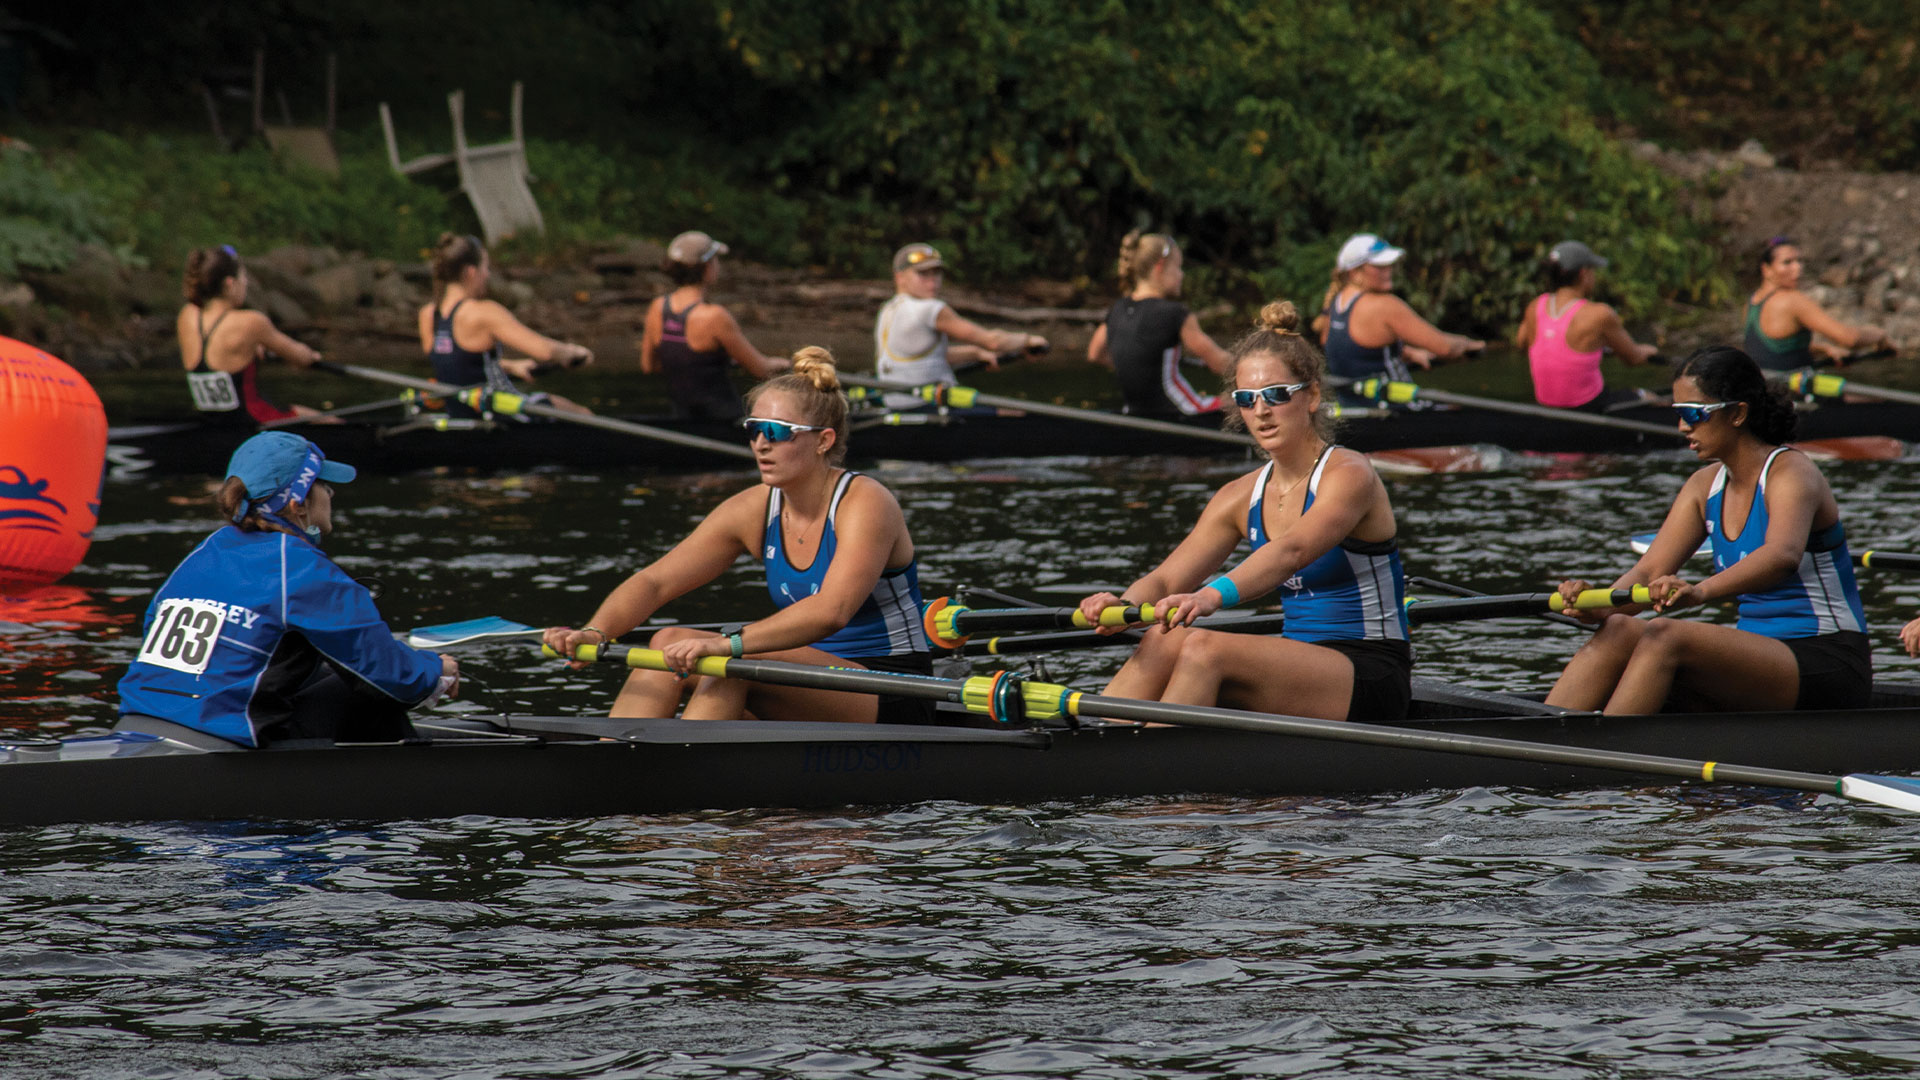 The No. 1 Wellesley College crew took second place on Sunday morning on the Charles River.